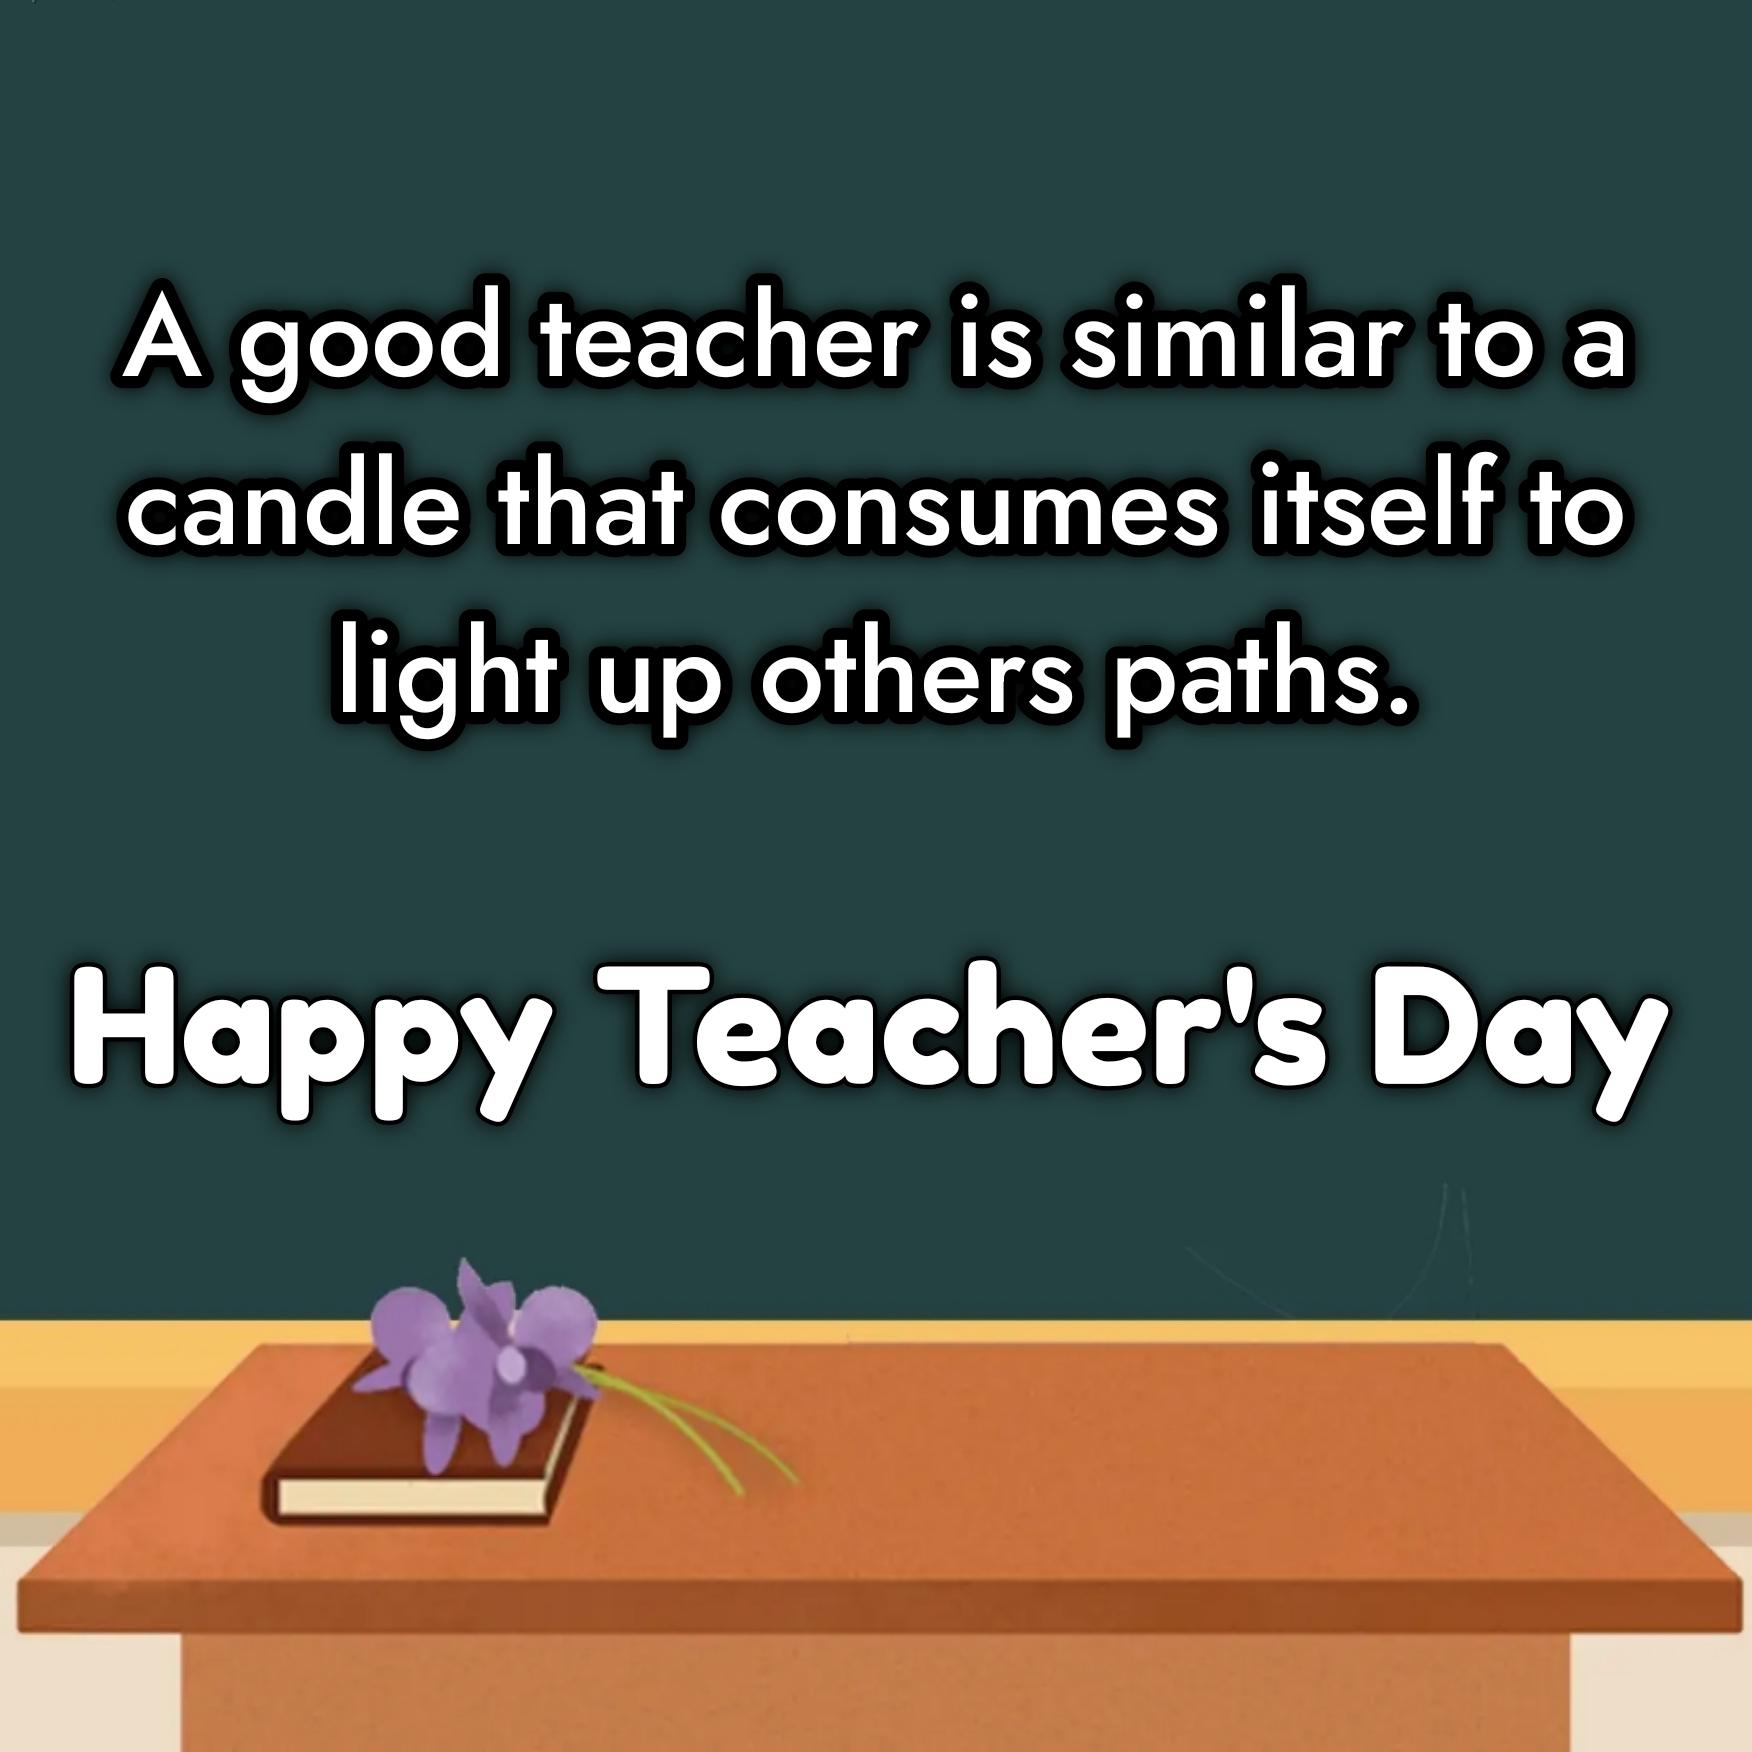 A good teacher is similar to a candle that consumes itself